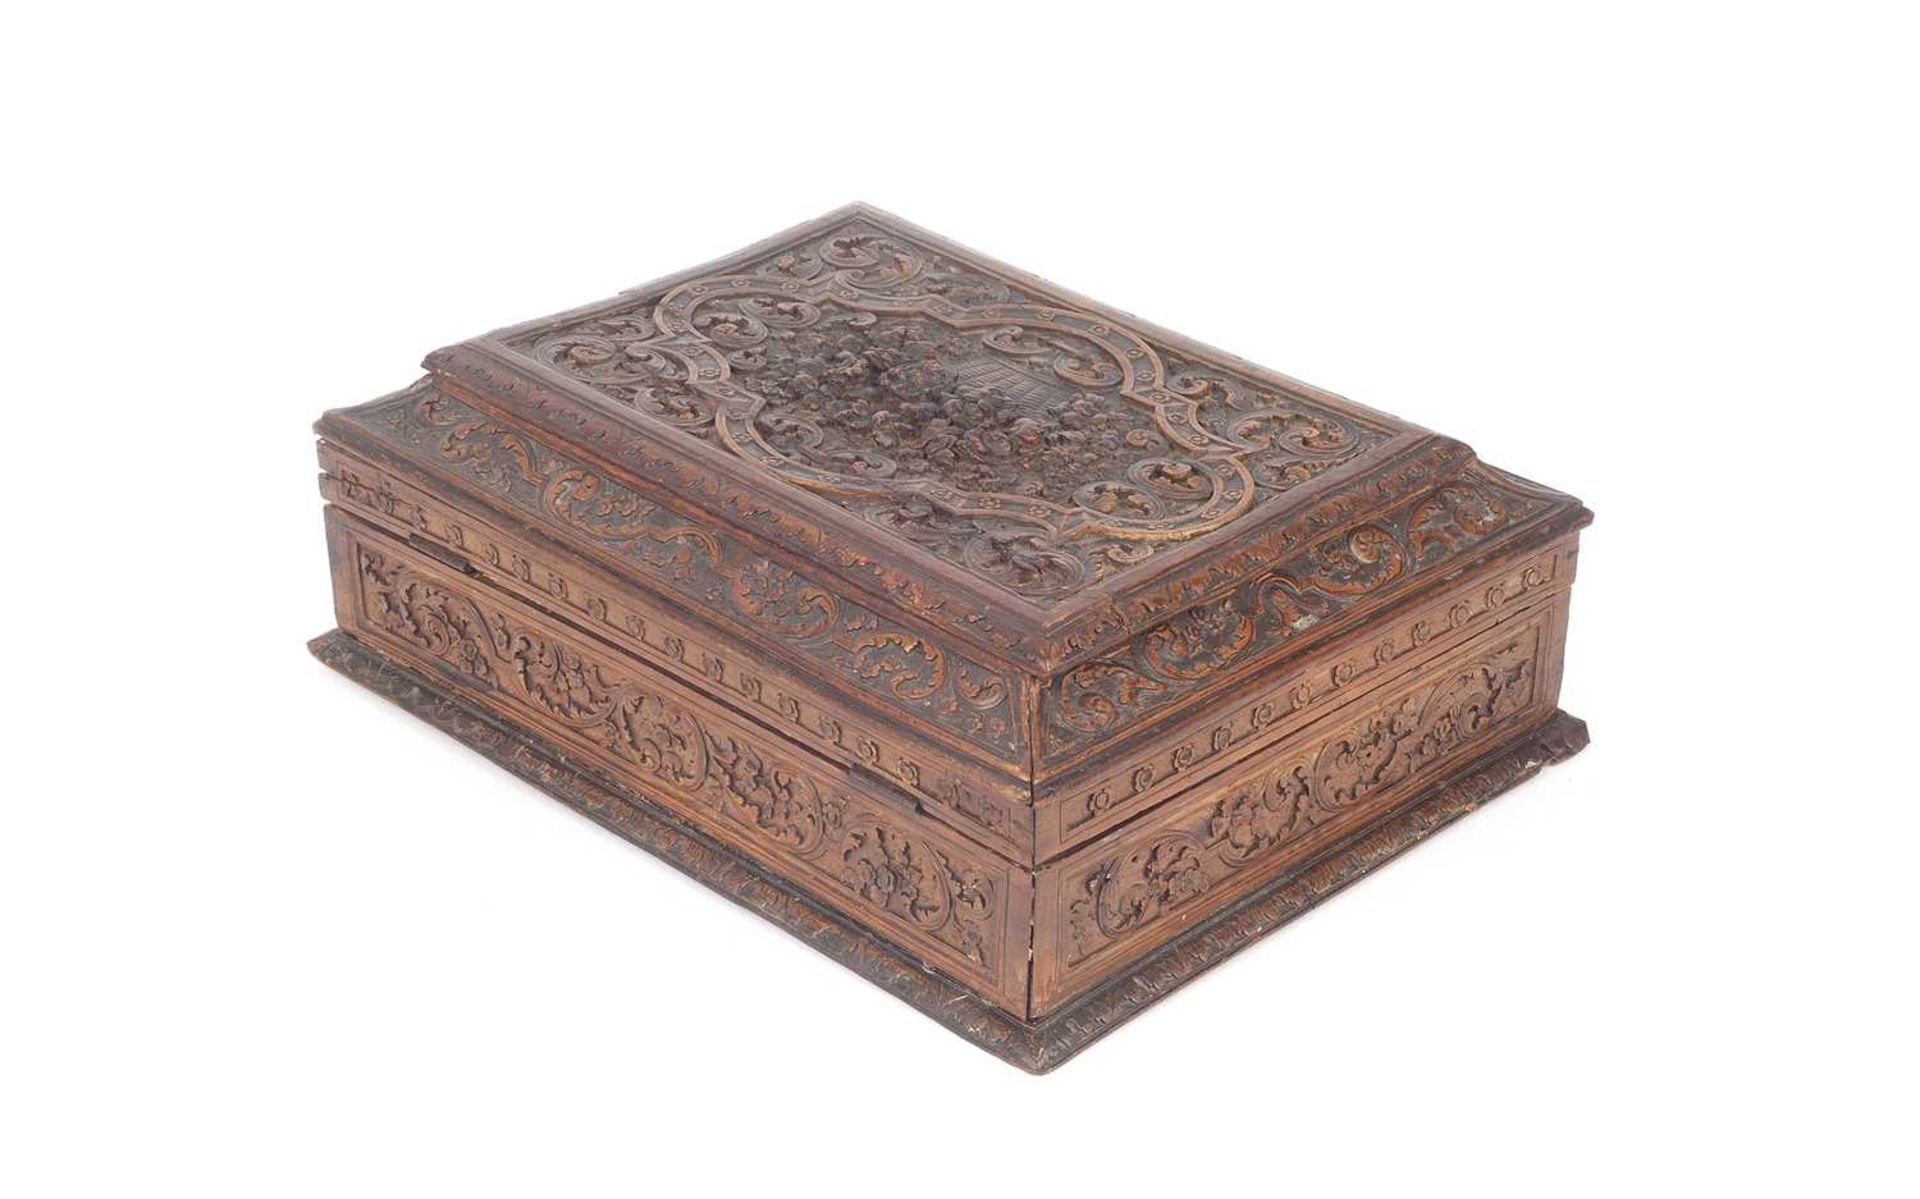 A 17TH / 18TH CENTURY CARVED FRUITWOOD BOX IN THE MANNER OF CESAR BAGARD OF NANCY, CIRCA 1700